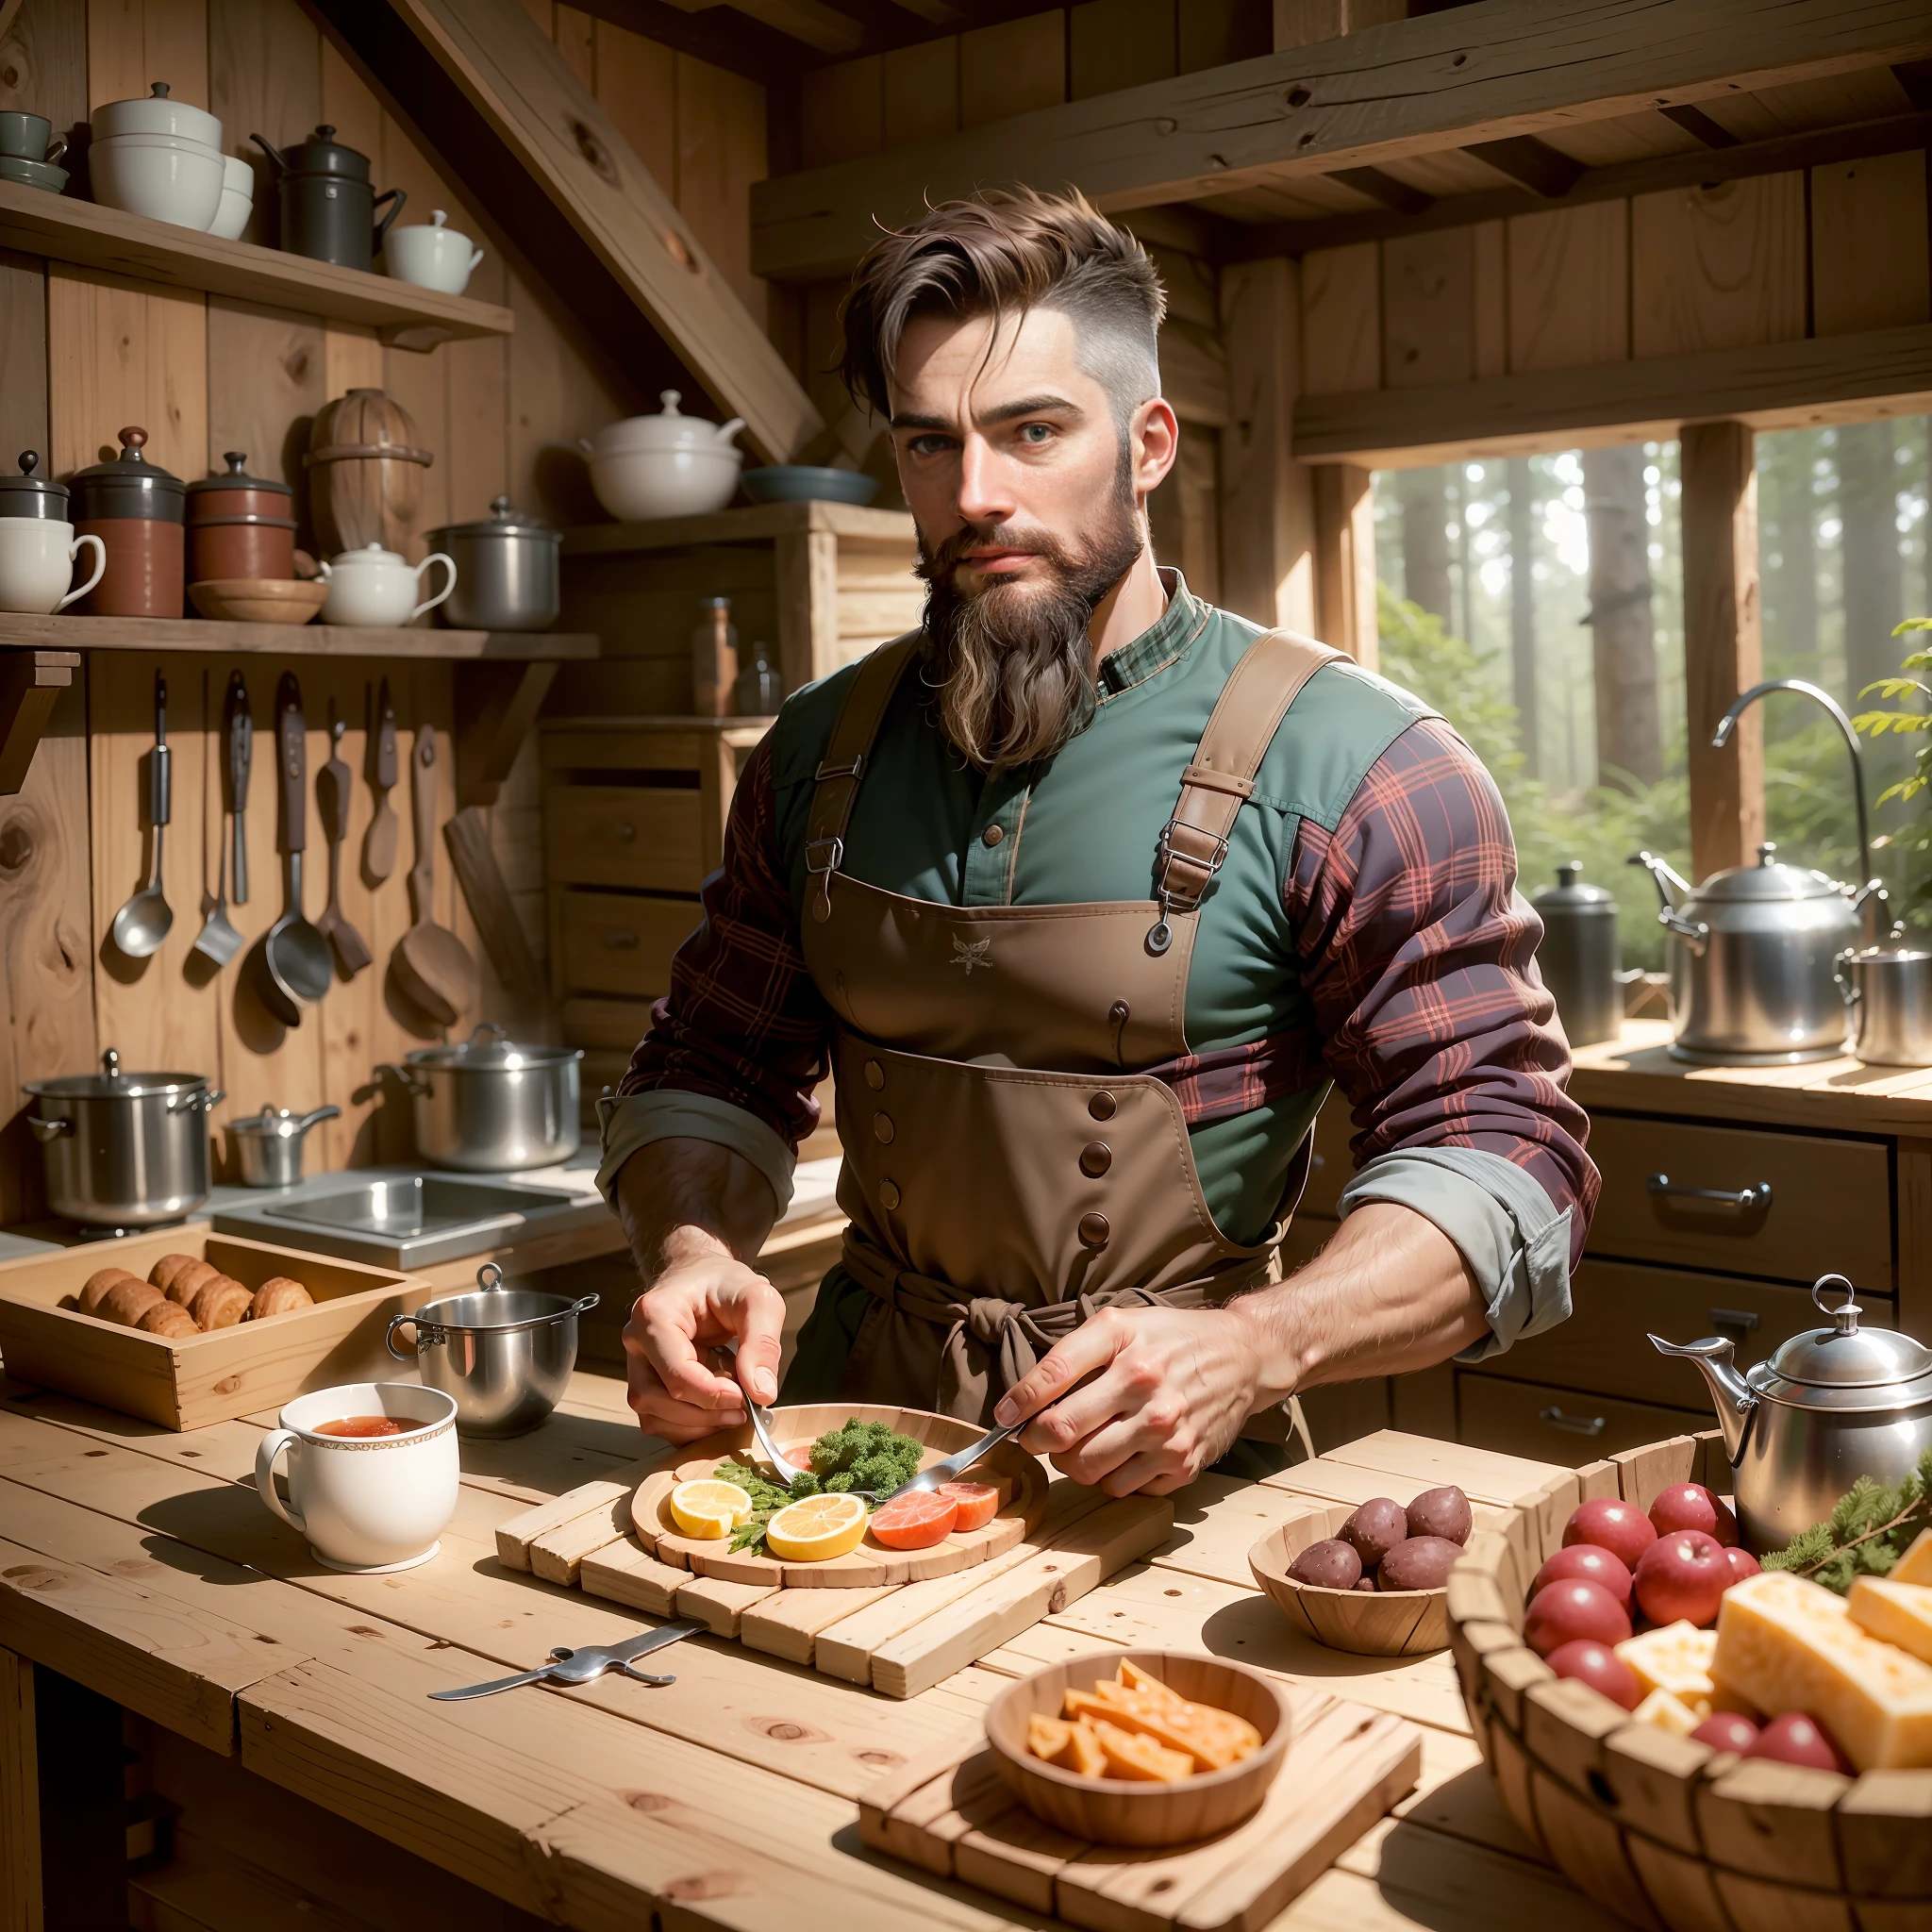 Attractive and elegant man, wearing lumberjack clothes but with the sample breastplate, photo in high quality, raw, in a detailed hut in the forest, with objects of a woodcutter behind and objects related to a kitchen prepared for breakfast. Gorgeous man with short hair shaved in machine 3, well done beard.